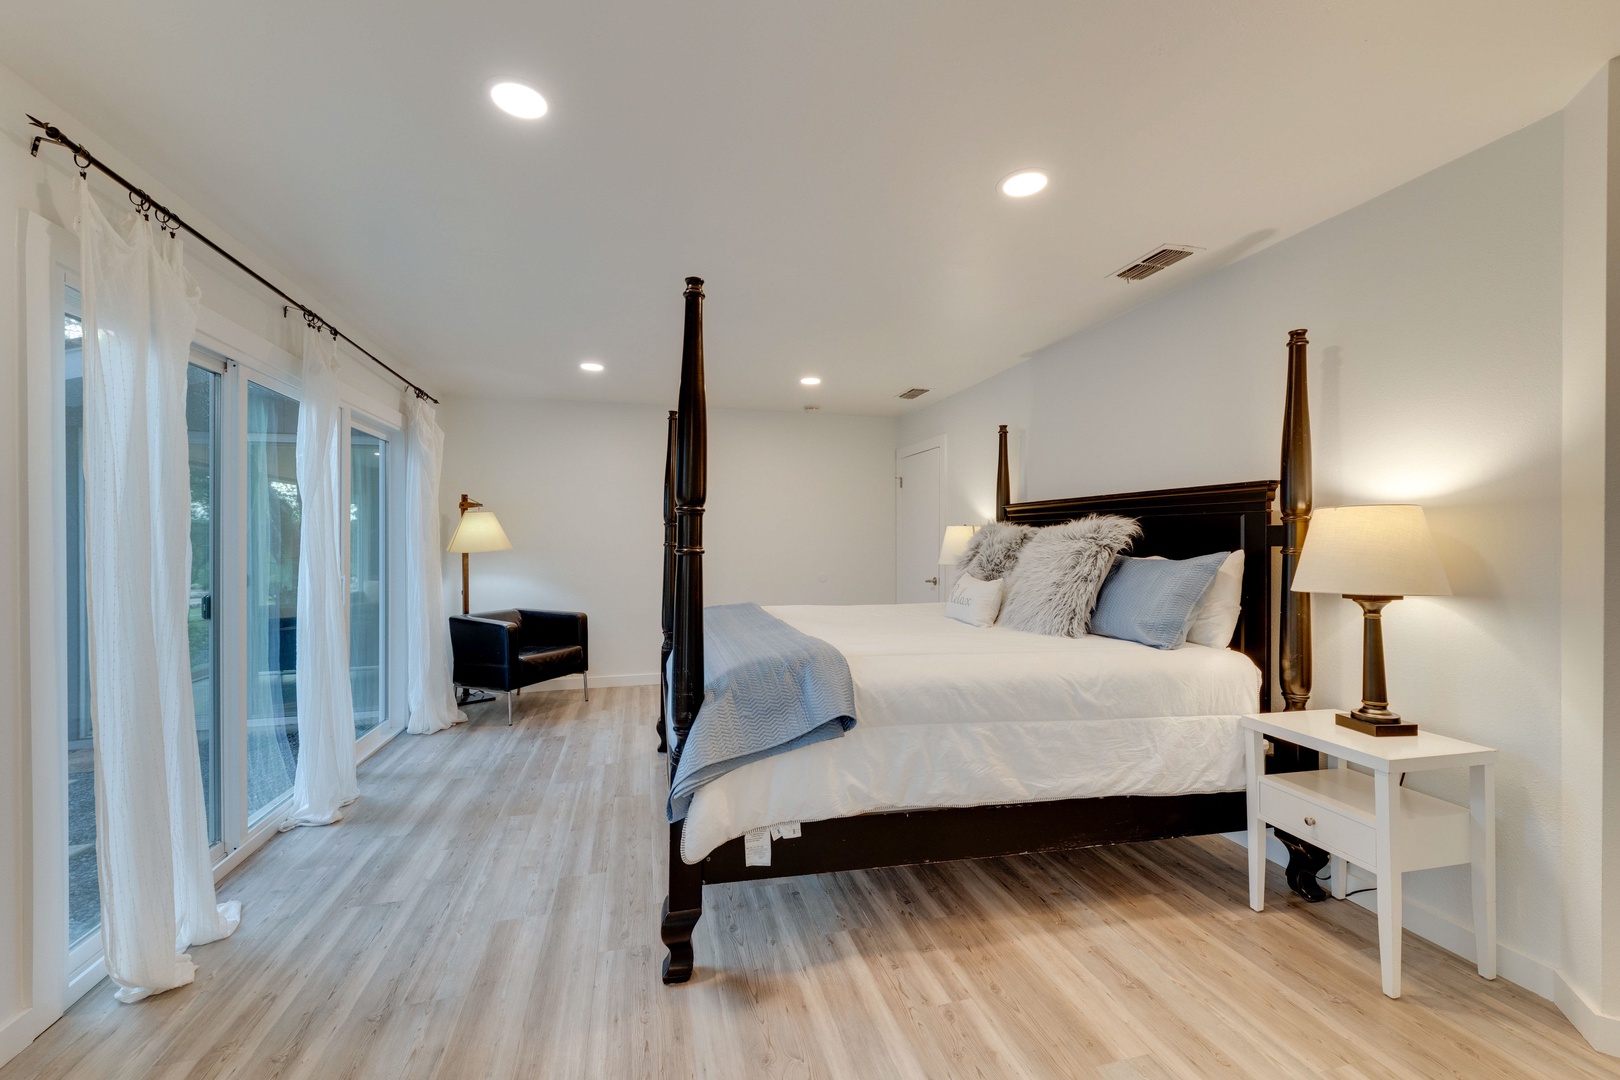 The master king suite offers stunning views, private en suite, & patio access